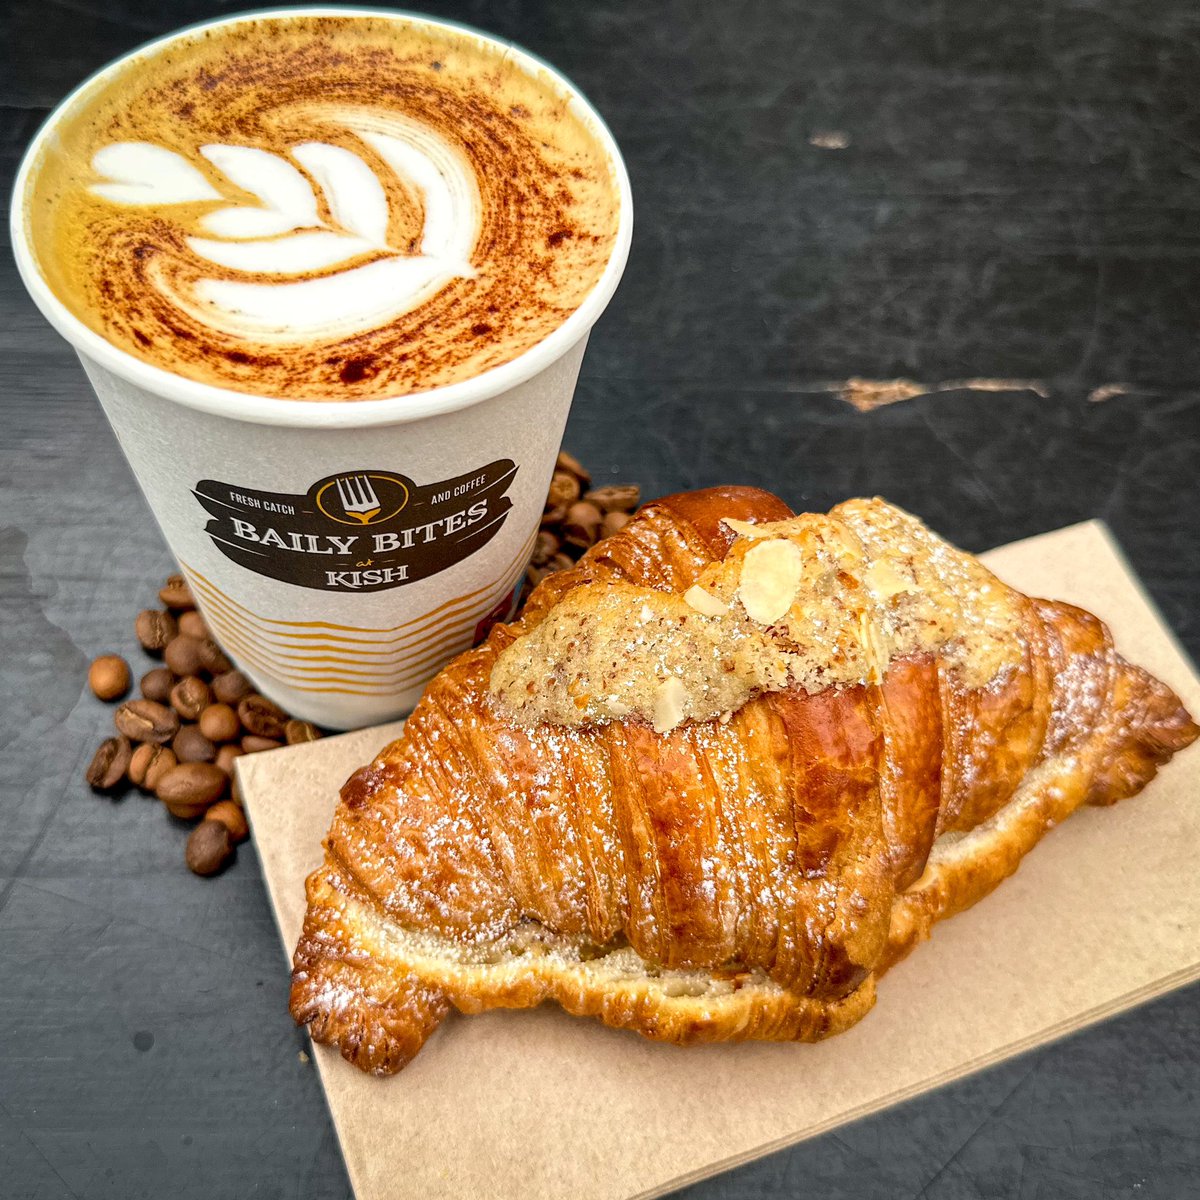 Monday morning with us 😎☕️🥐

Stop by Baily Bites and choose your favourite pastry and fresh barista coffee 

We're open 10am - 5:30pm

#freshcatchandcoffee #pastries #seafood #bailybites #coffee #kishfish #howth #howthcliffwalk #dublin #ireland #breakfast #baristacoffee